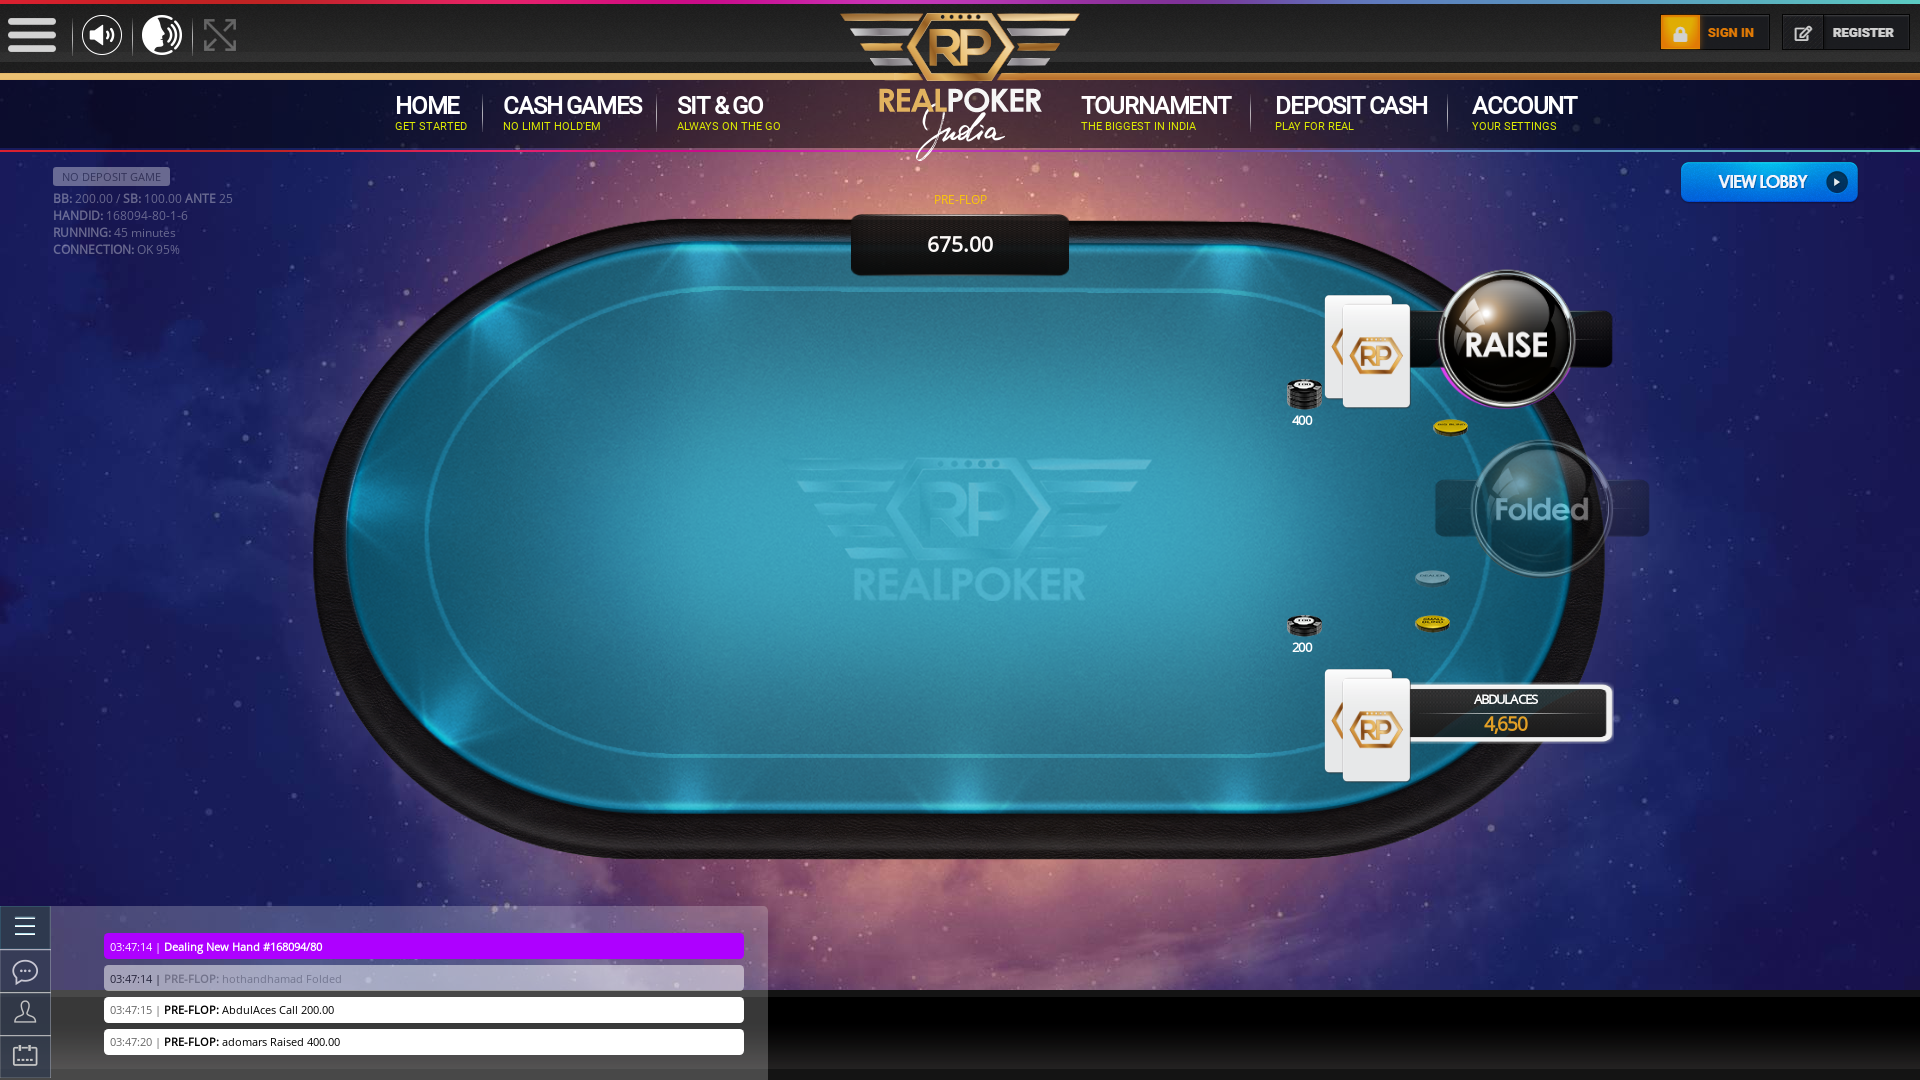 Real poker 10 player table in the 45th minute